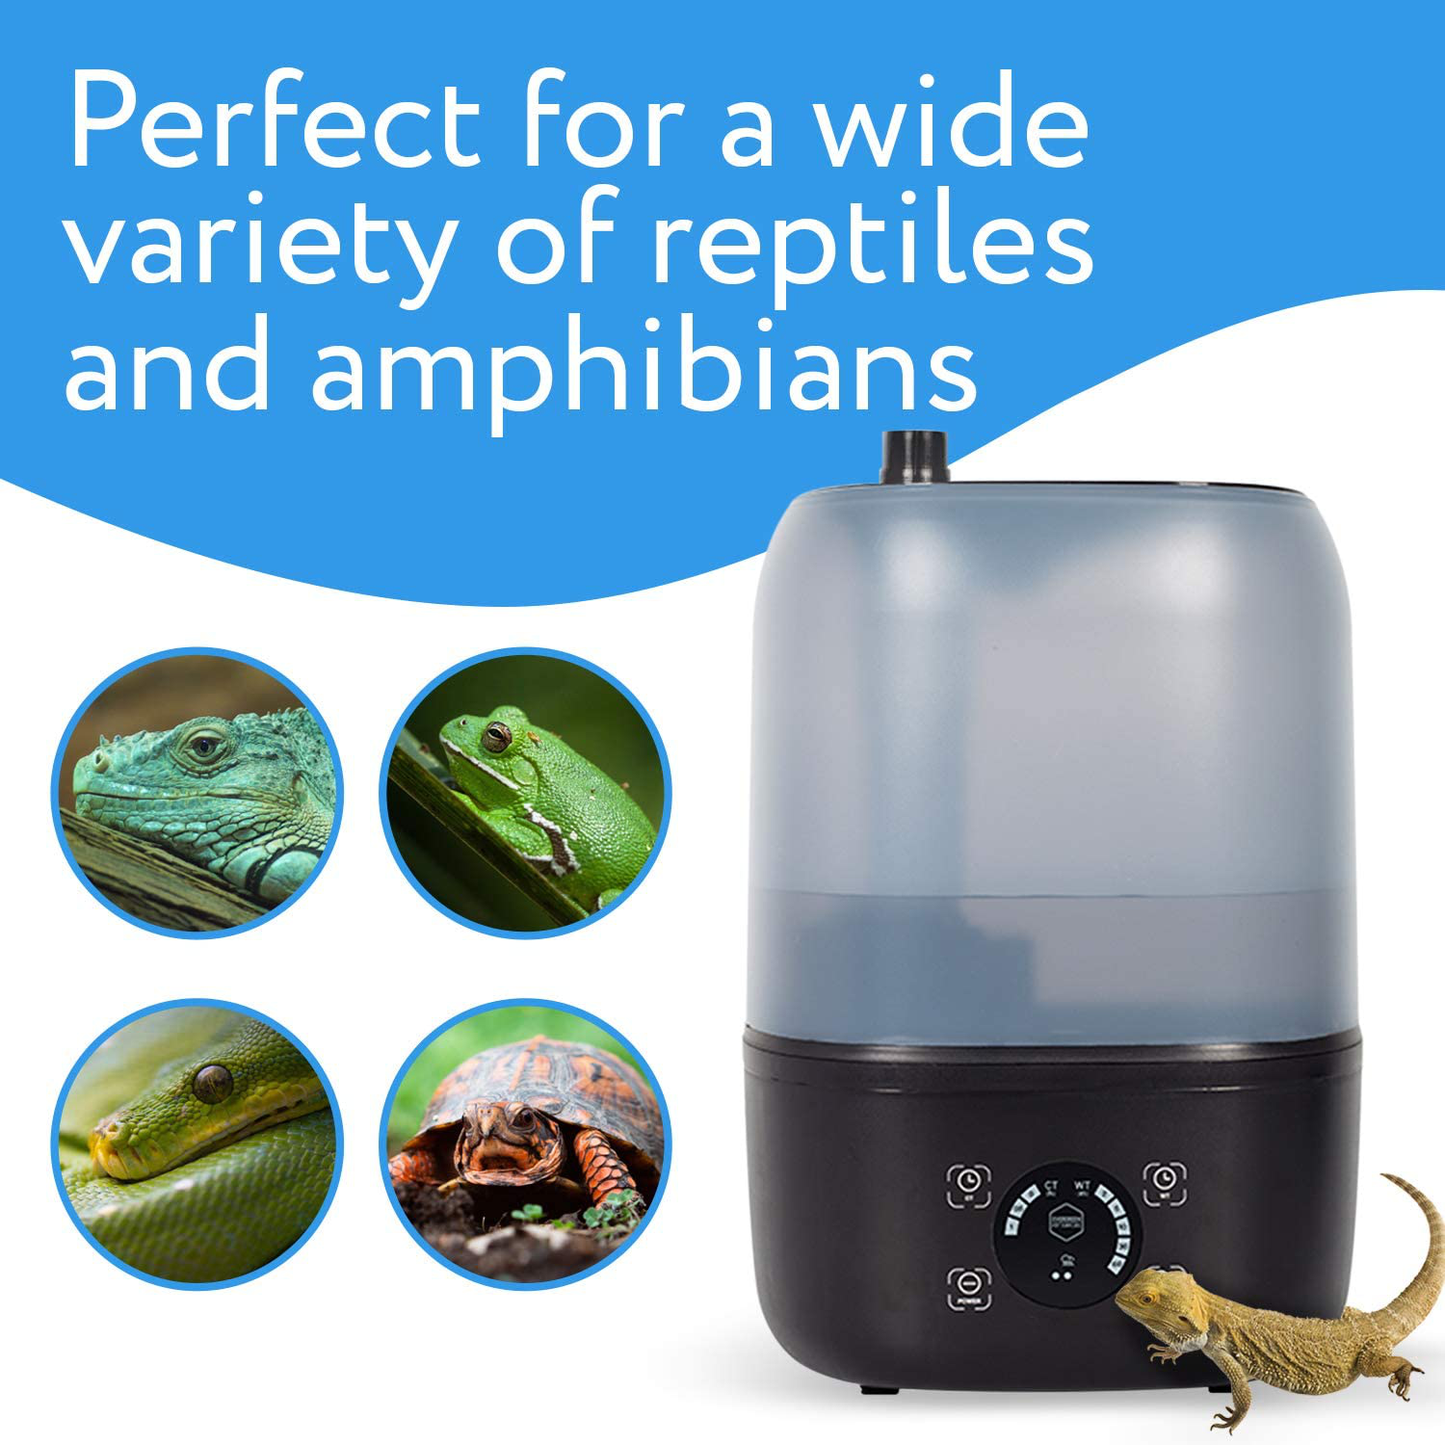 Reptile Humidifier/Fogger - 4L Tank - New Digital Timer - Add Water from Top! for Reptiles/Amphibians/Herps - Compatible with All Terrariums and Enclosures Animals & Pet Supplies > Pet Supplies > Reptile & Amphibian Supplies > Reptile & Amphibian Habitat Accessories Evergreen Pet Supplies   